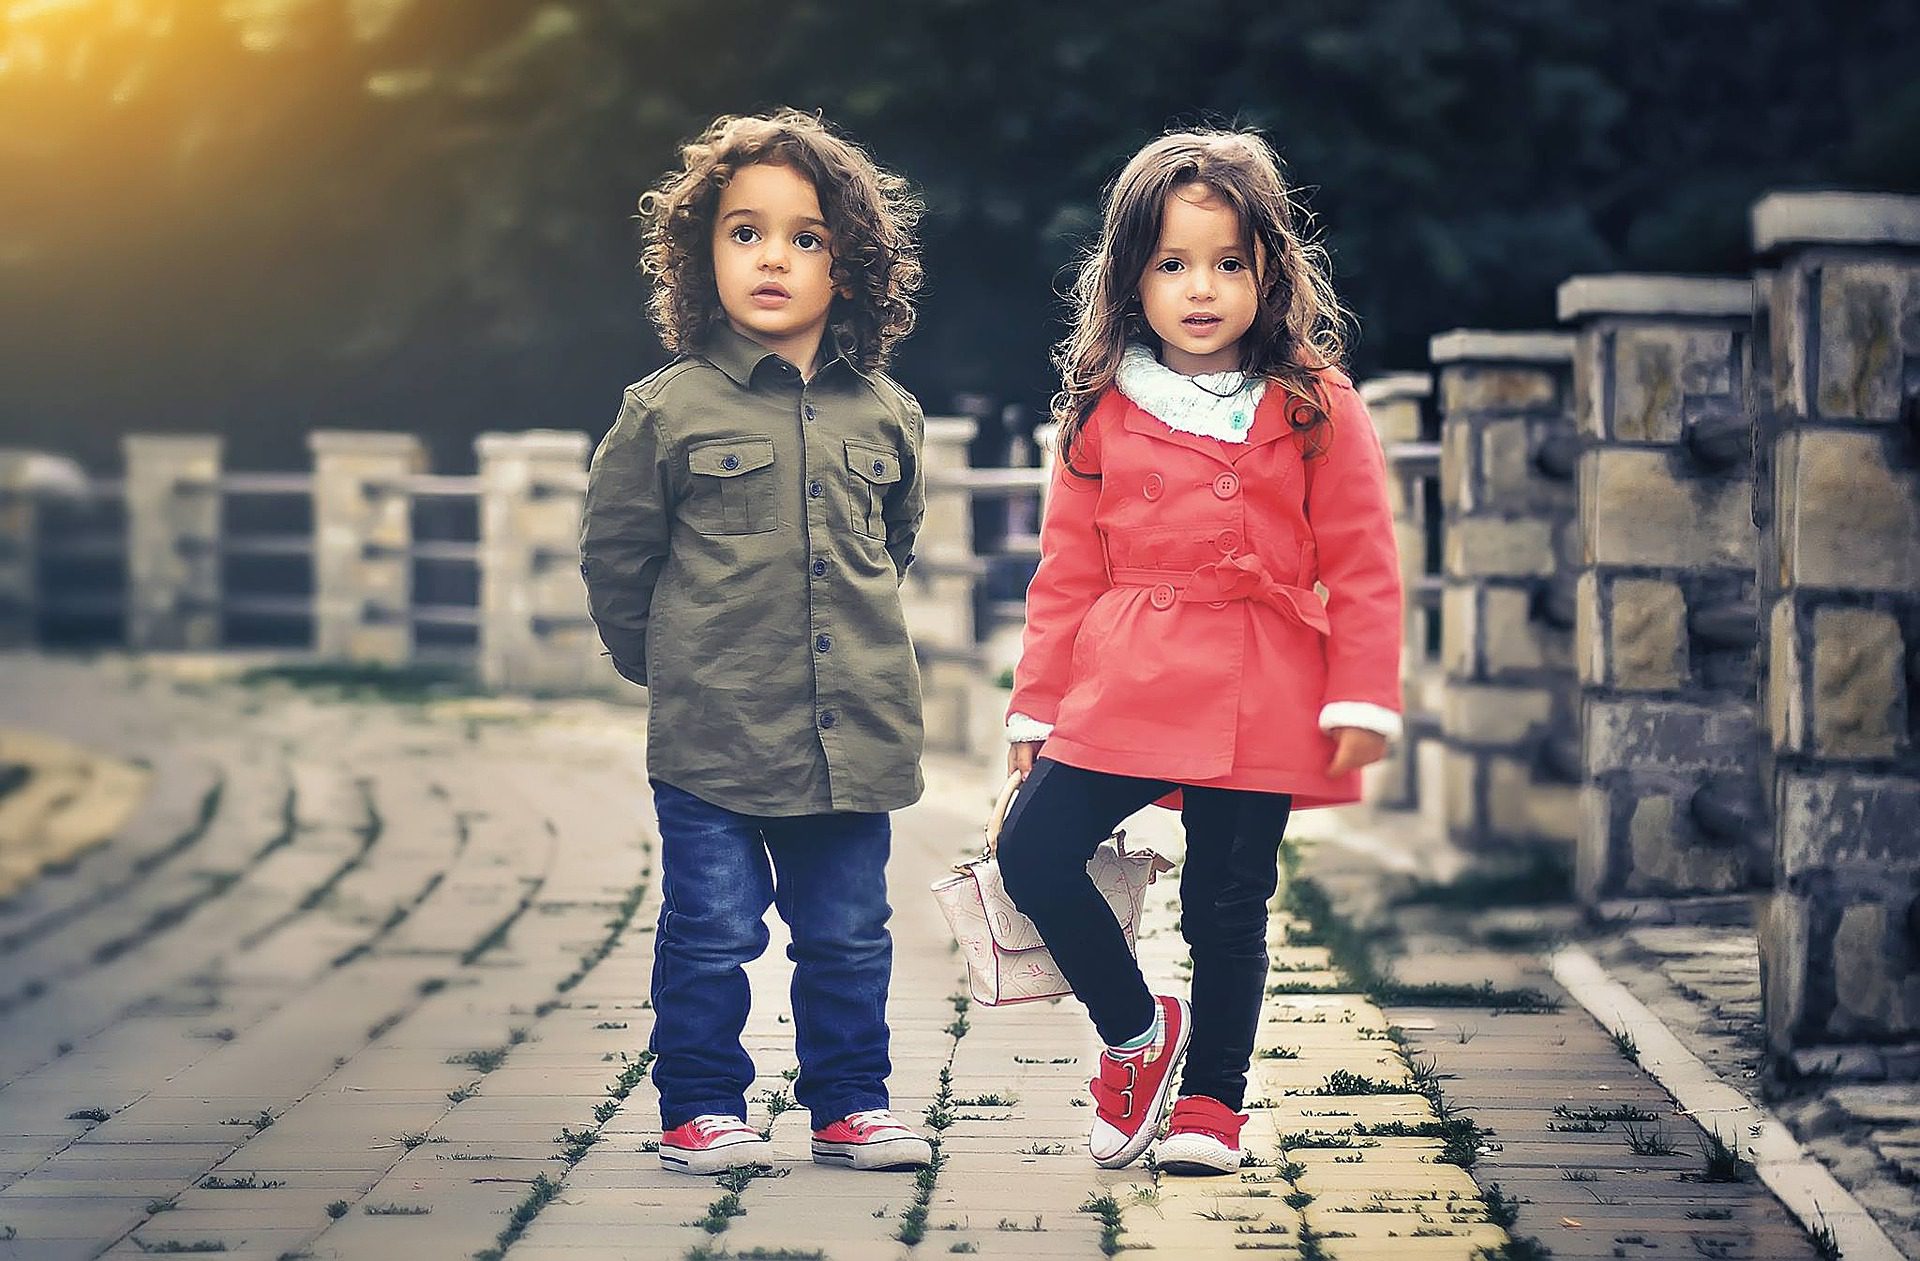 Two children standing on a brick road.